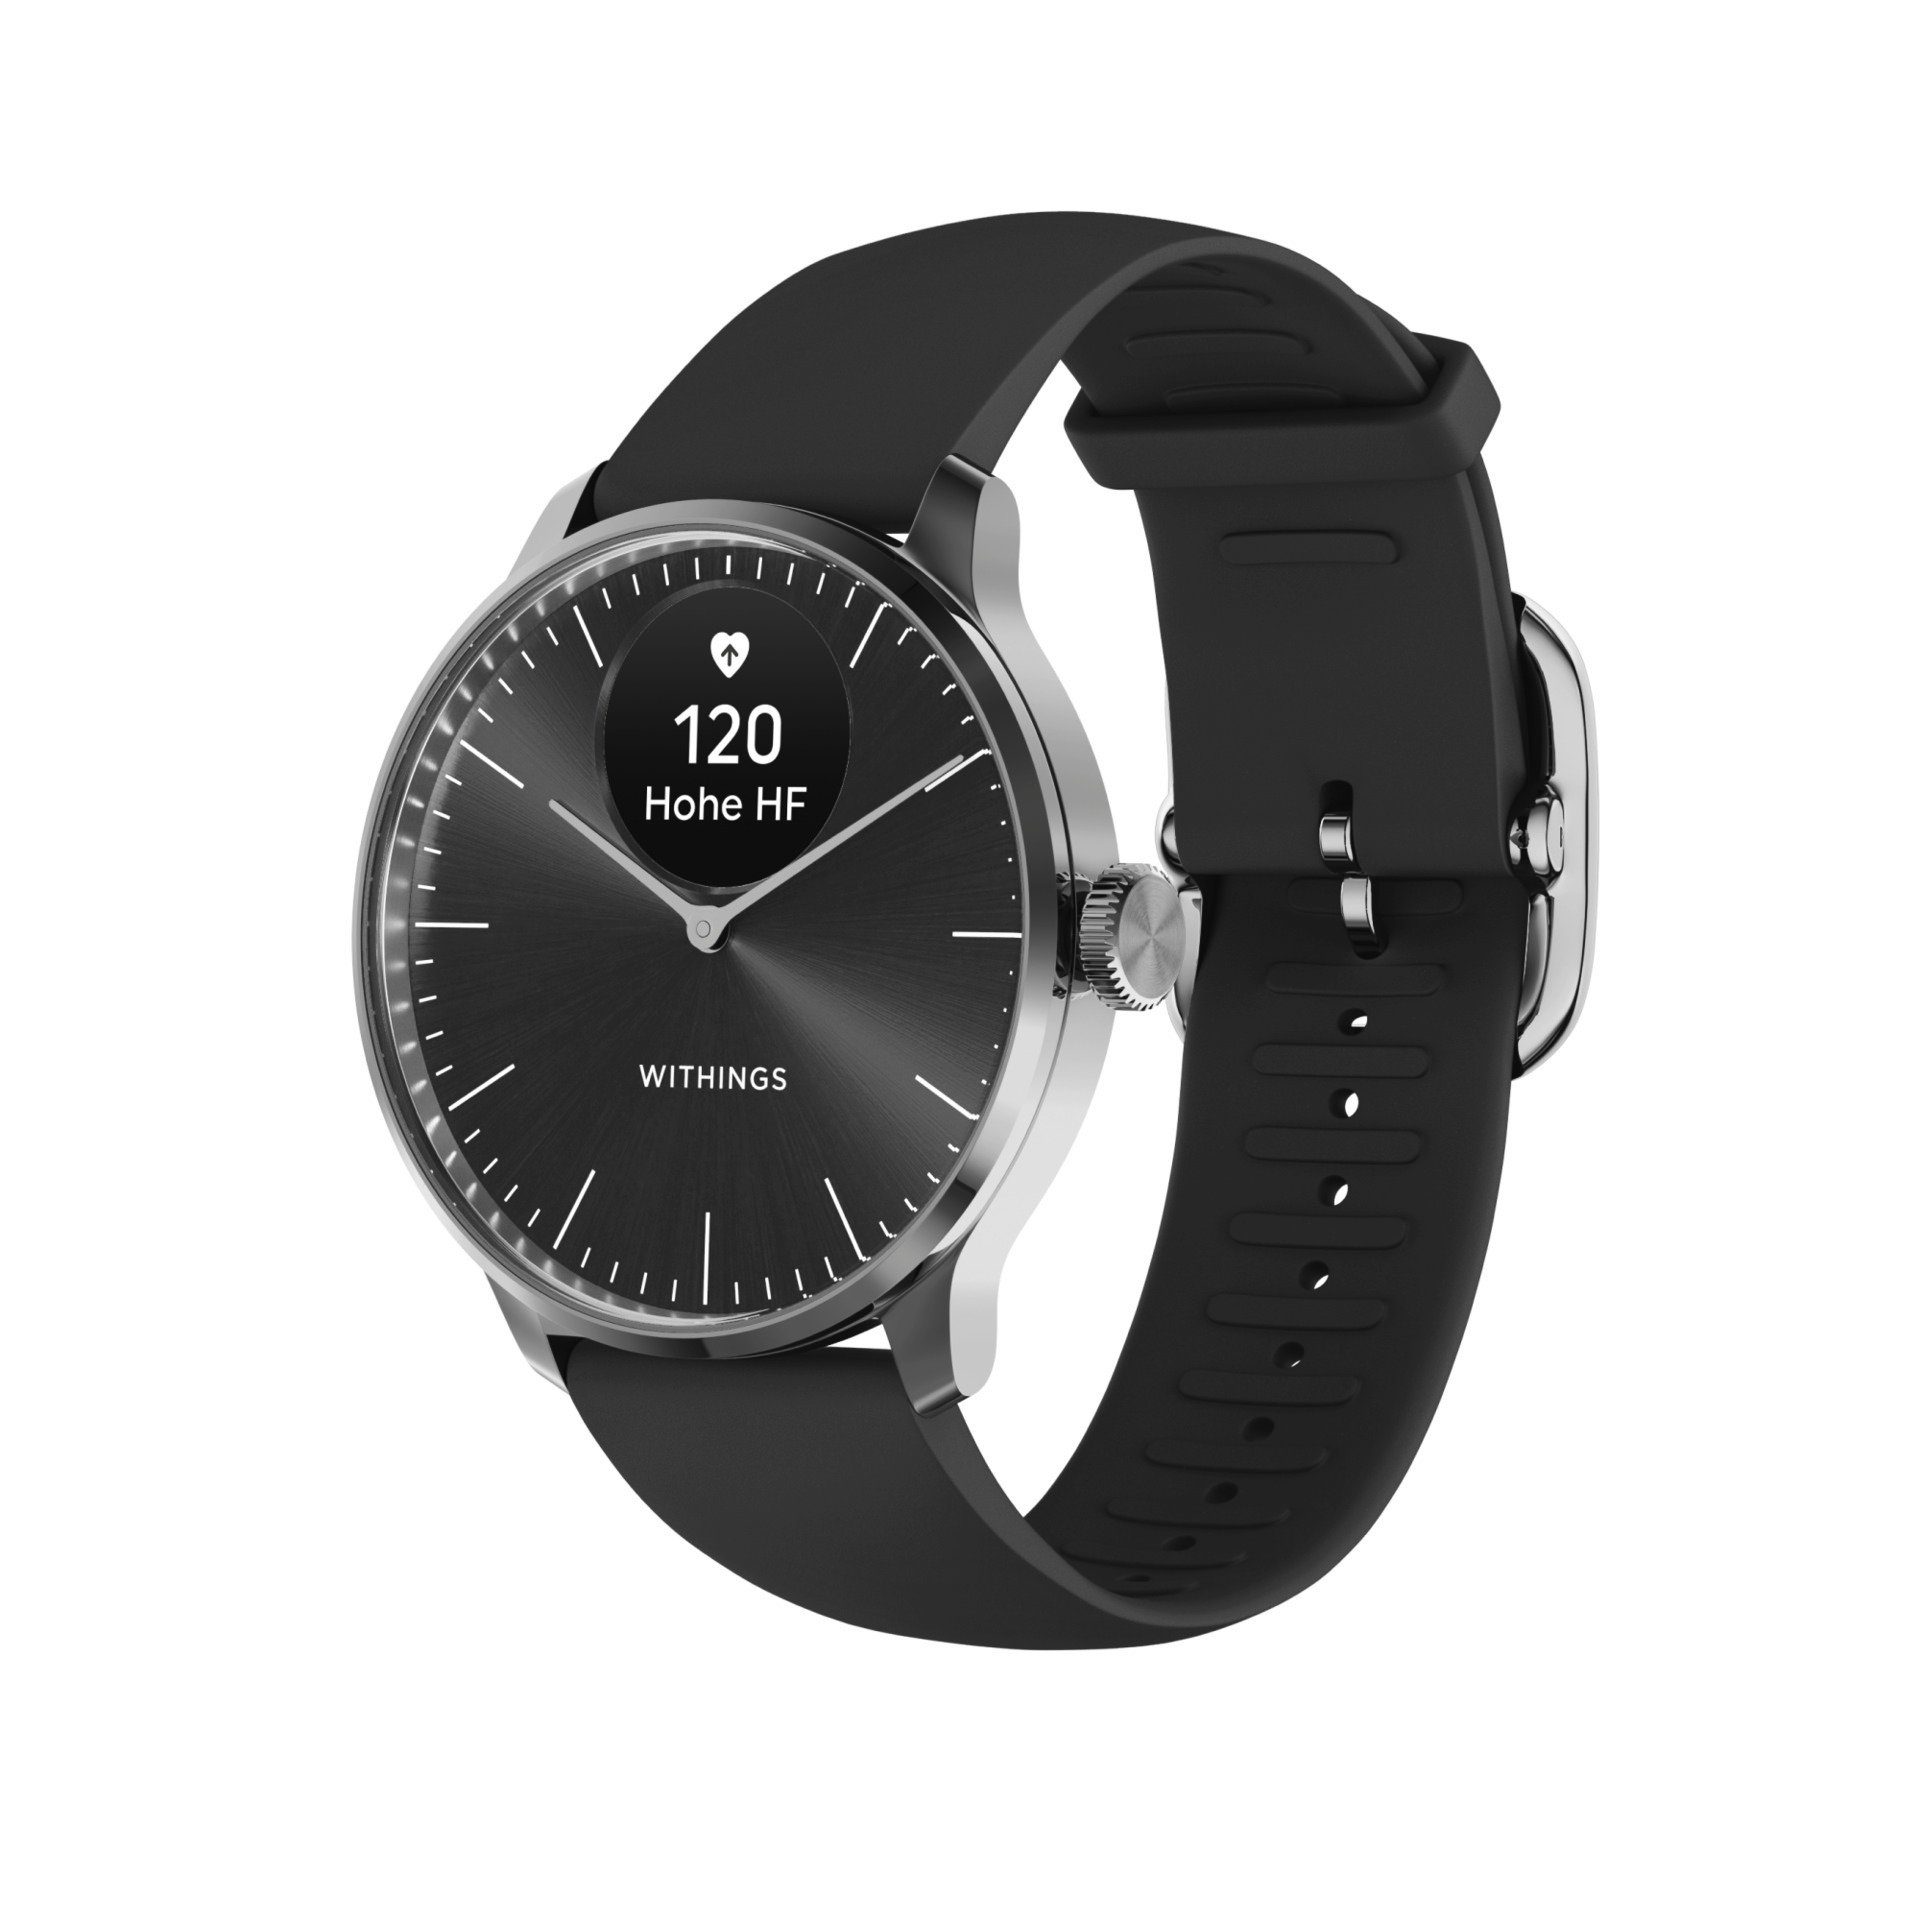 【Empfehlung】 Withings ScanWatch Light cm/0,63 Smartwatch Zoll) (1,6